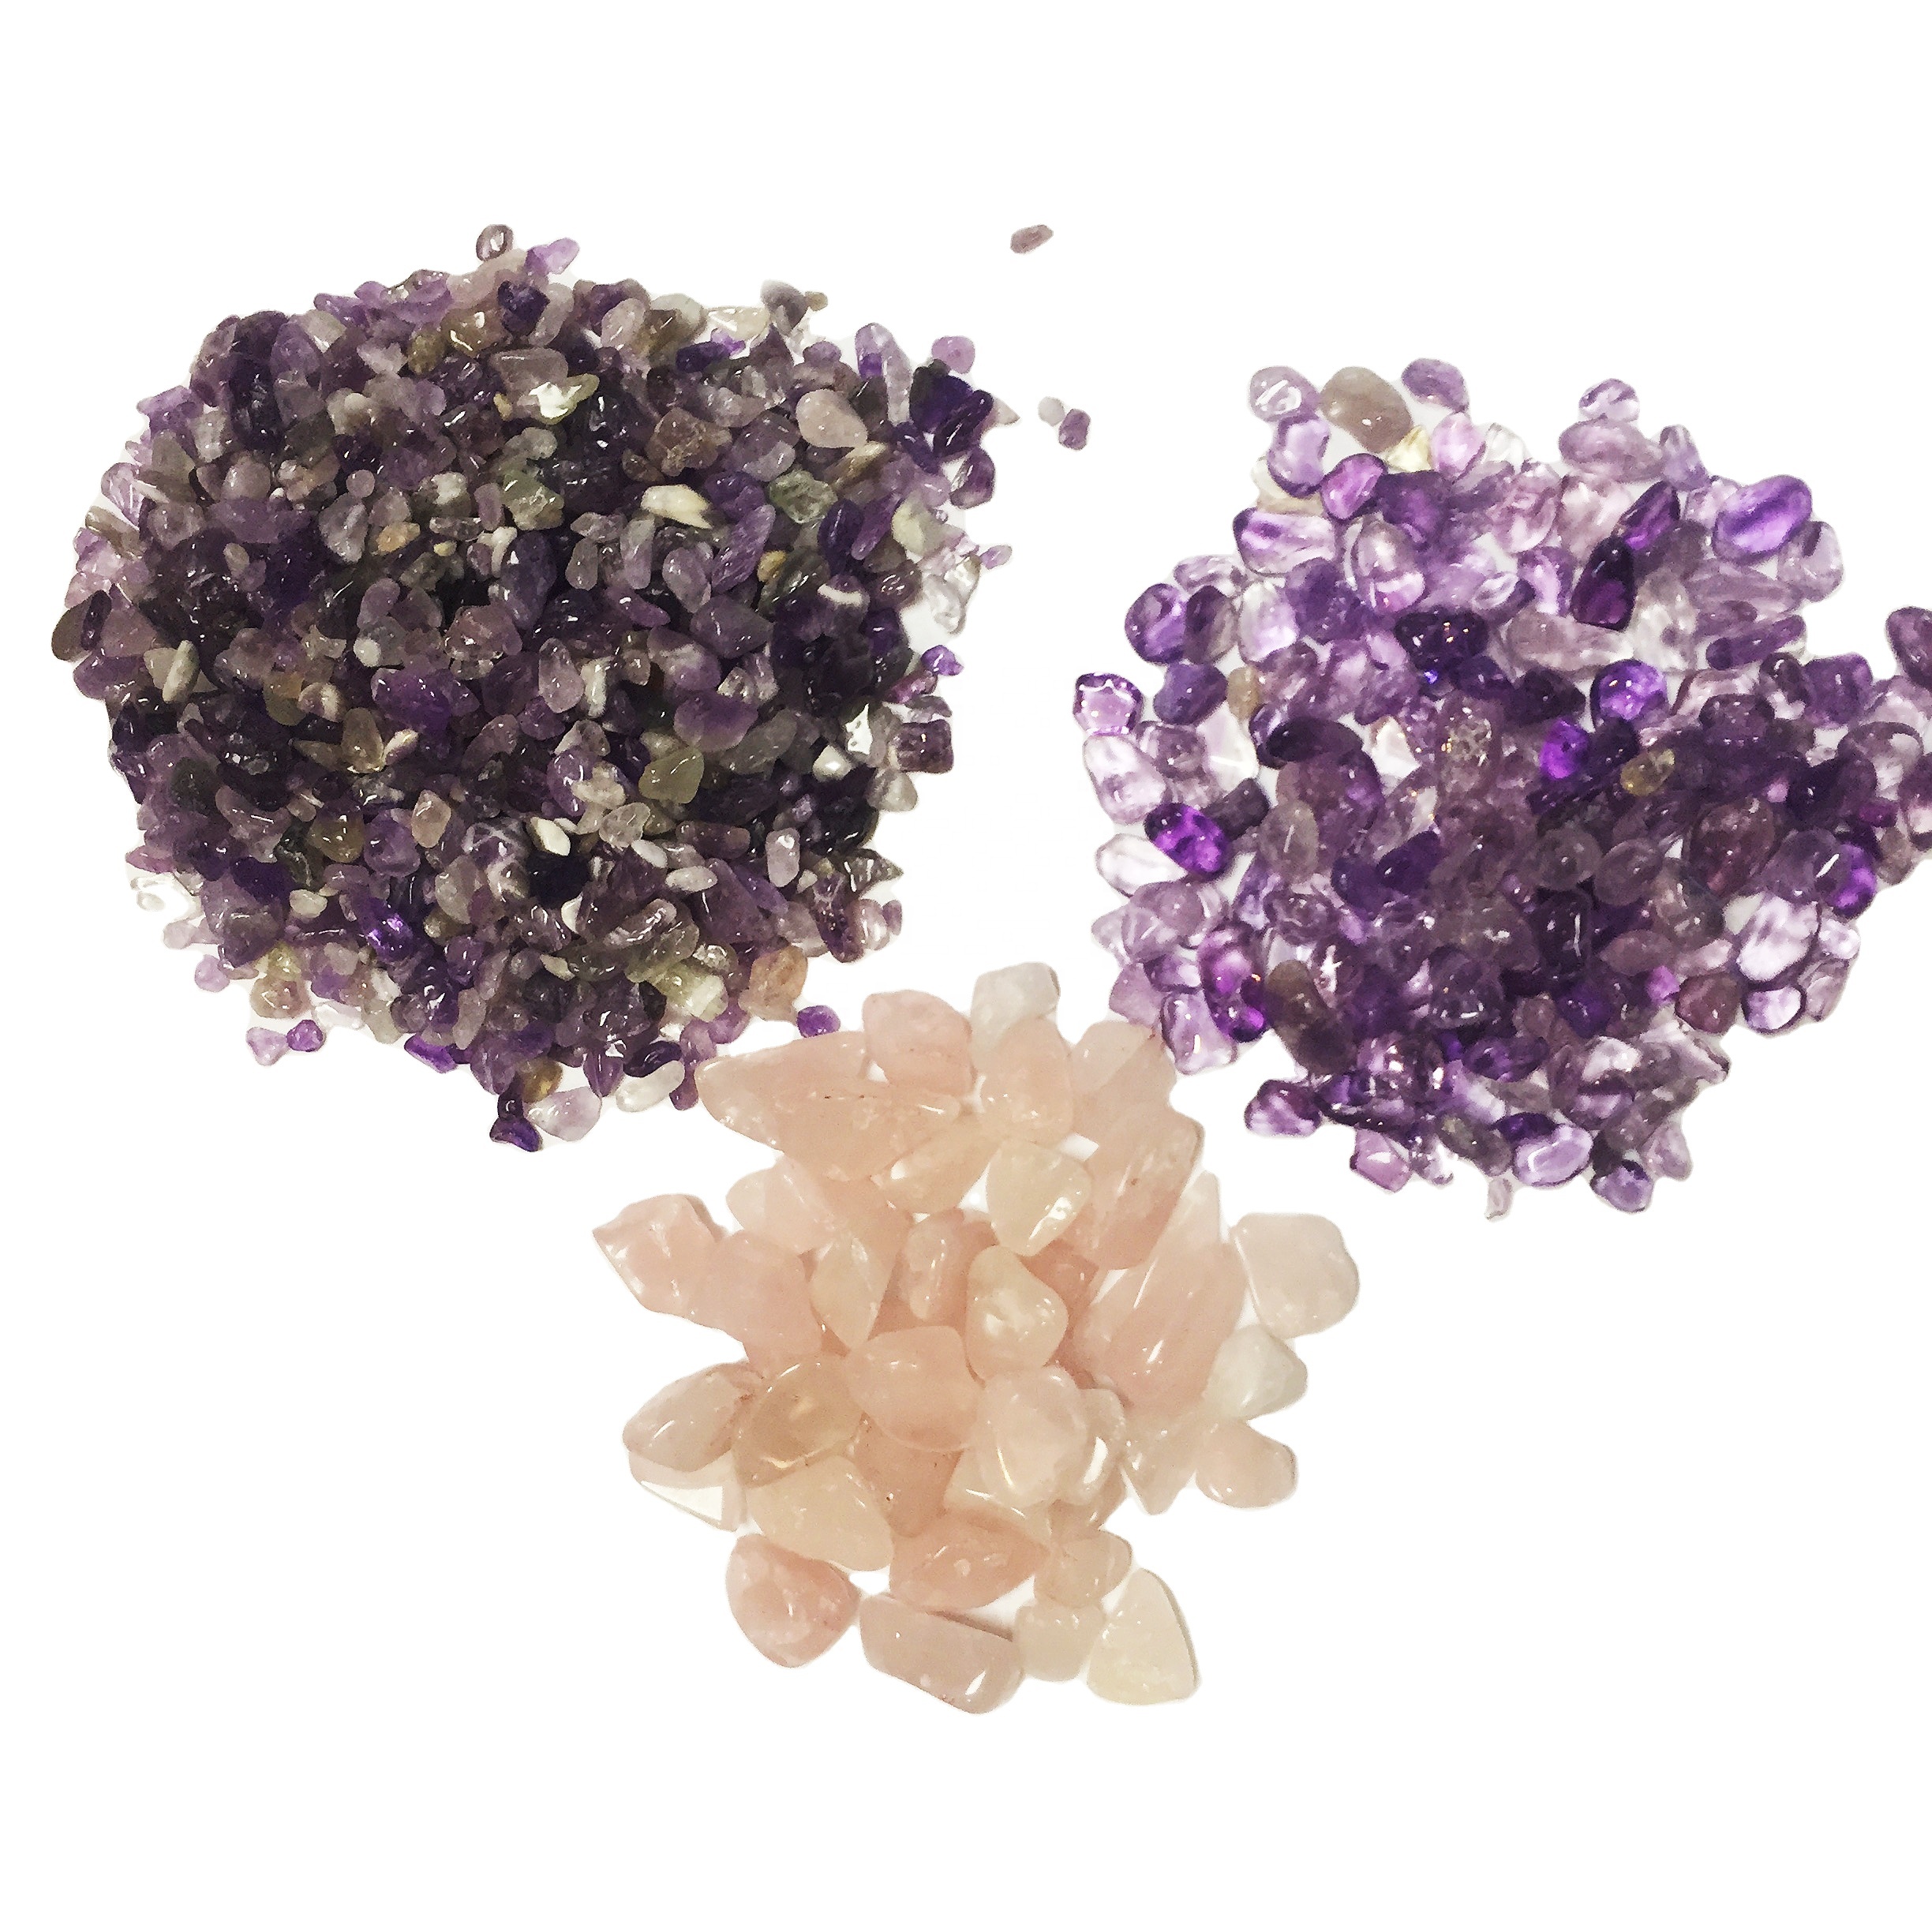 High purity 99.9% degaussing stone purple crystal crushed stone powder crystal